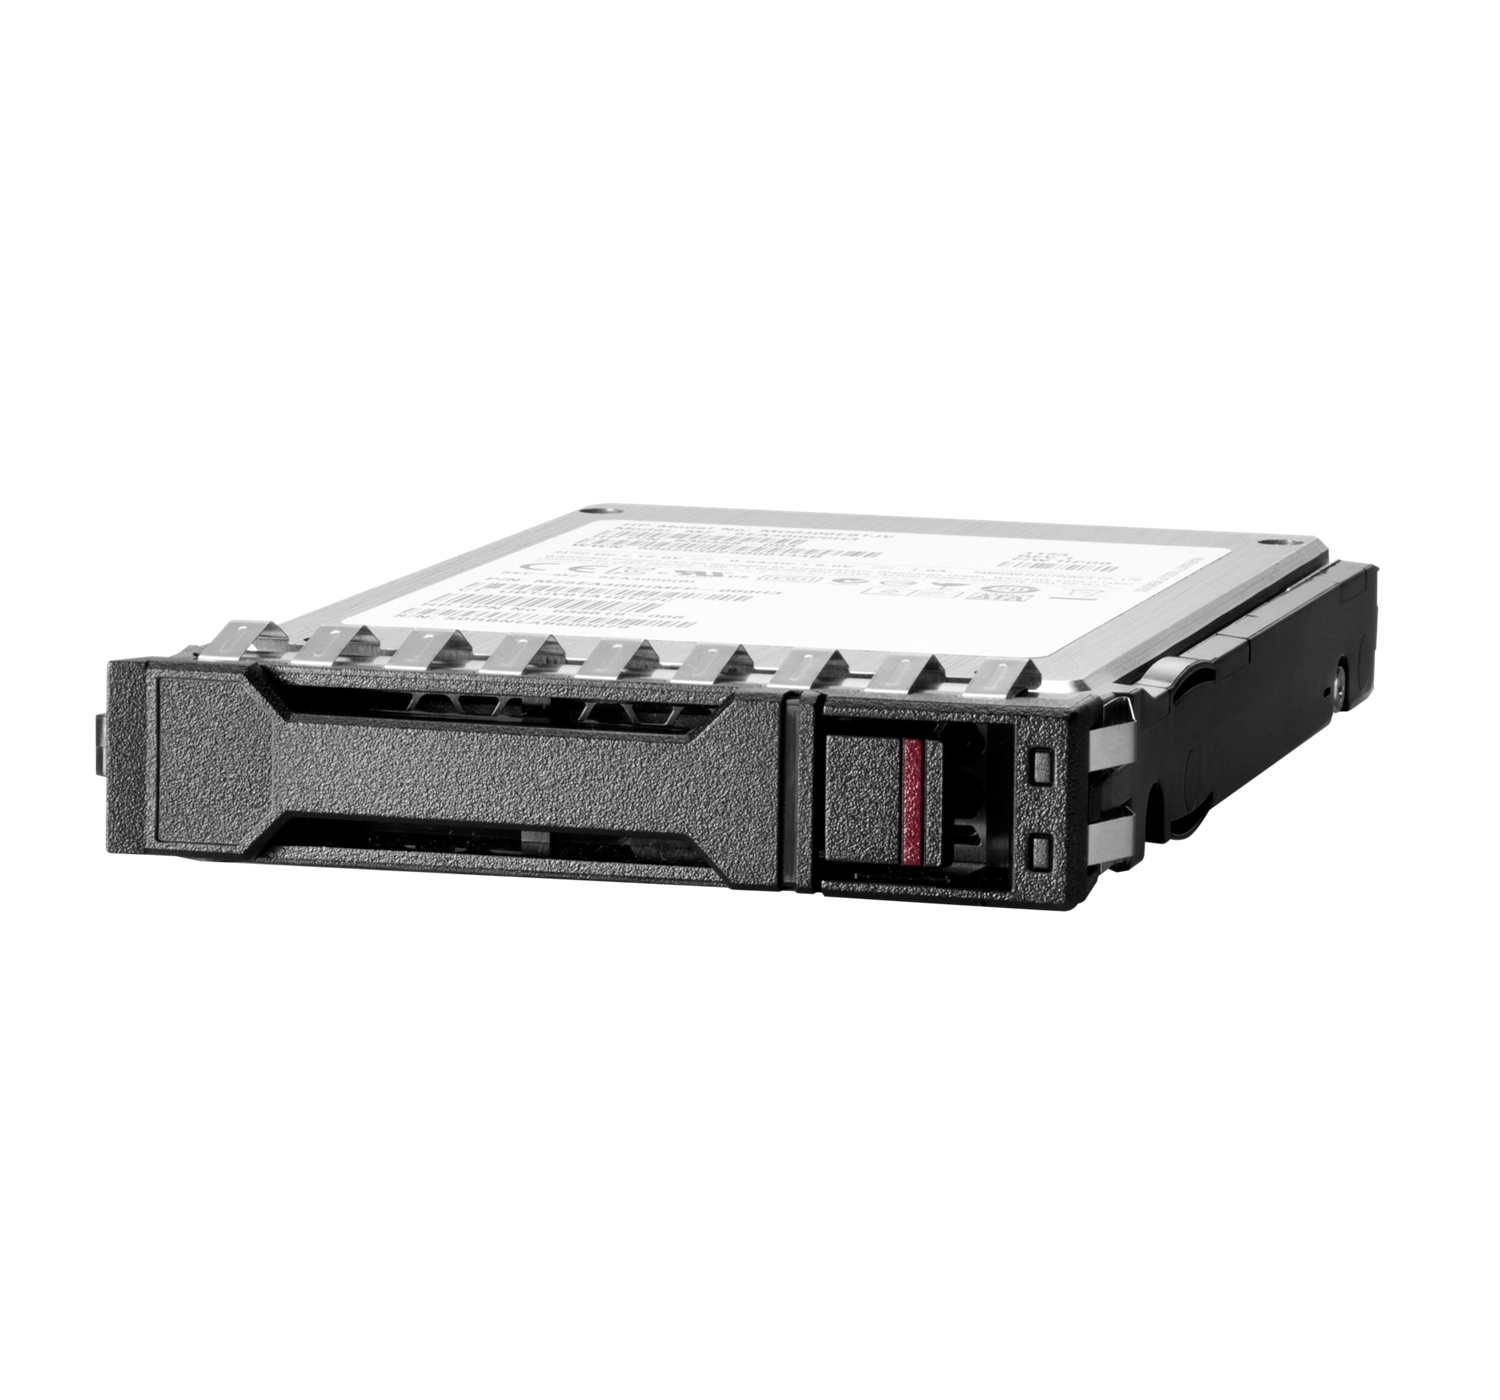 HPE Mixed Use S4620 - SSD - 480 GB - Hot-Swap - 2.5" SFF (6.4 cm SFF)